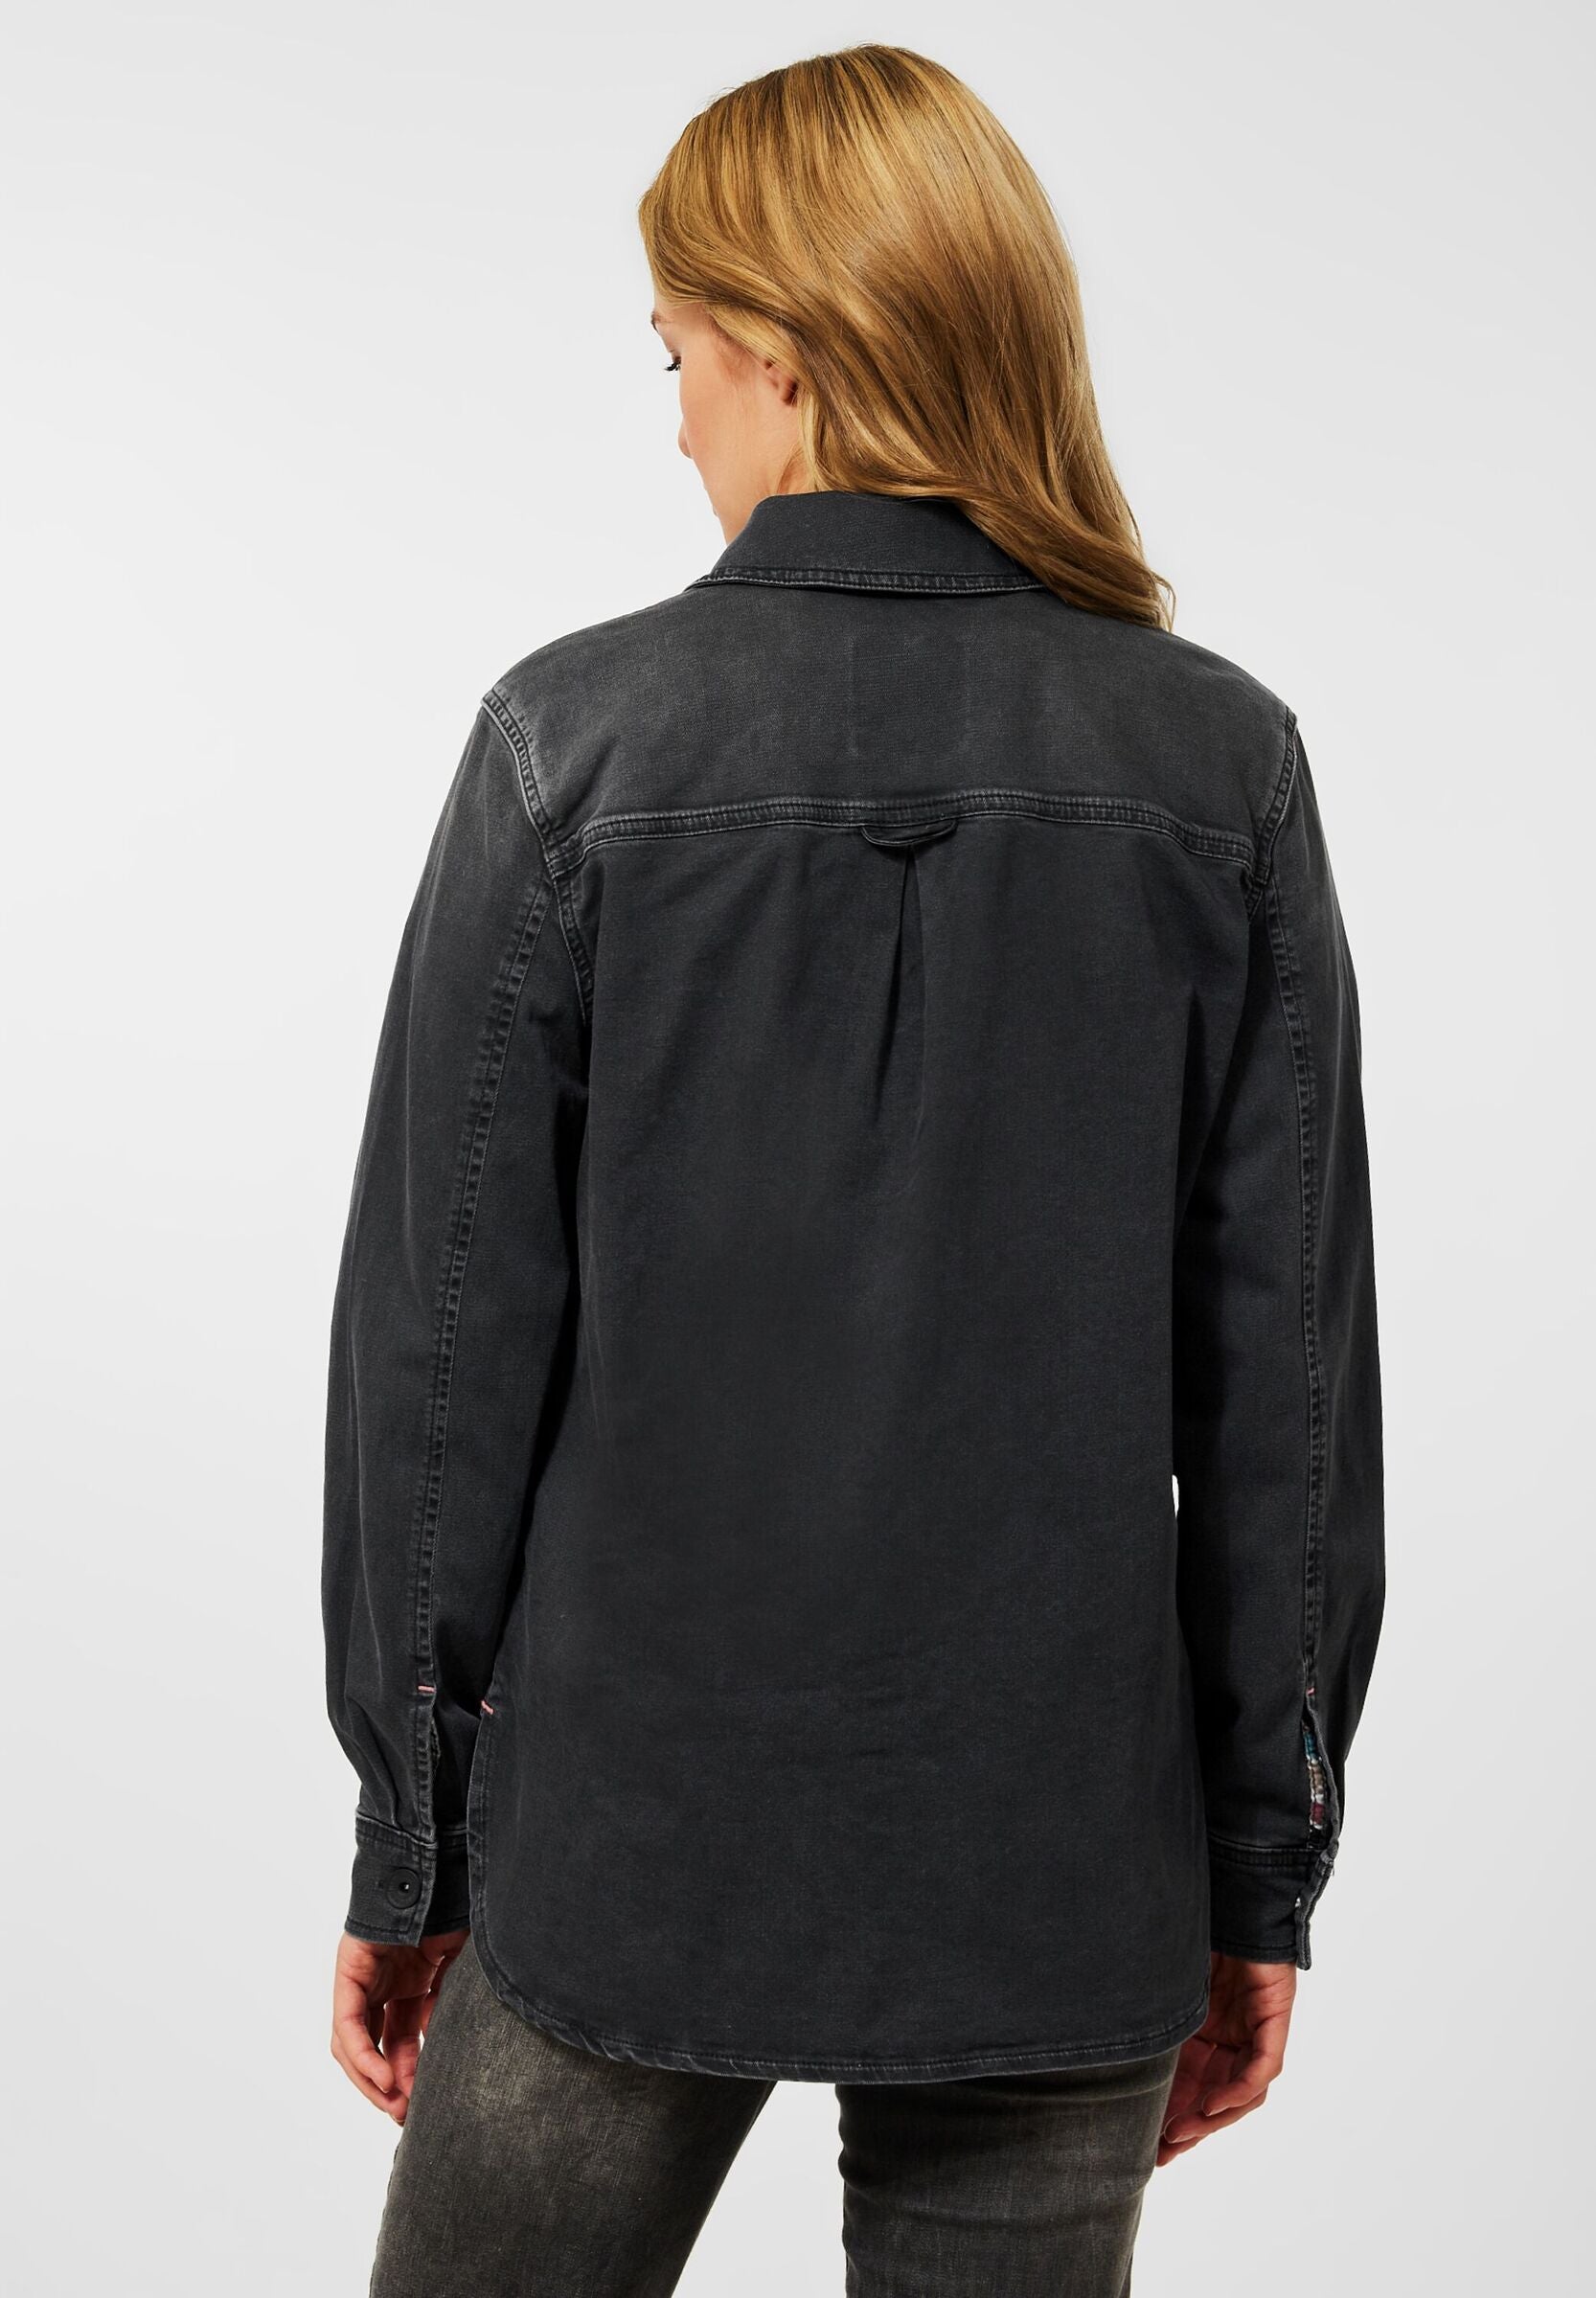 Dunkles Jeans Overshirt